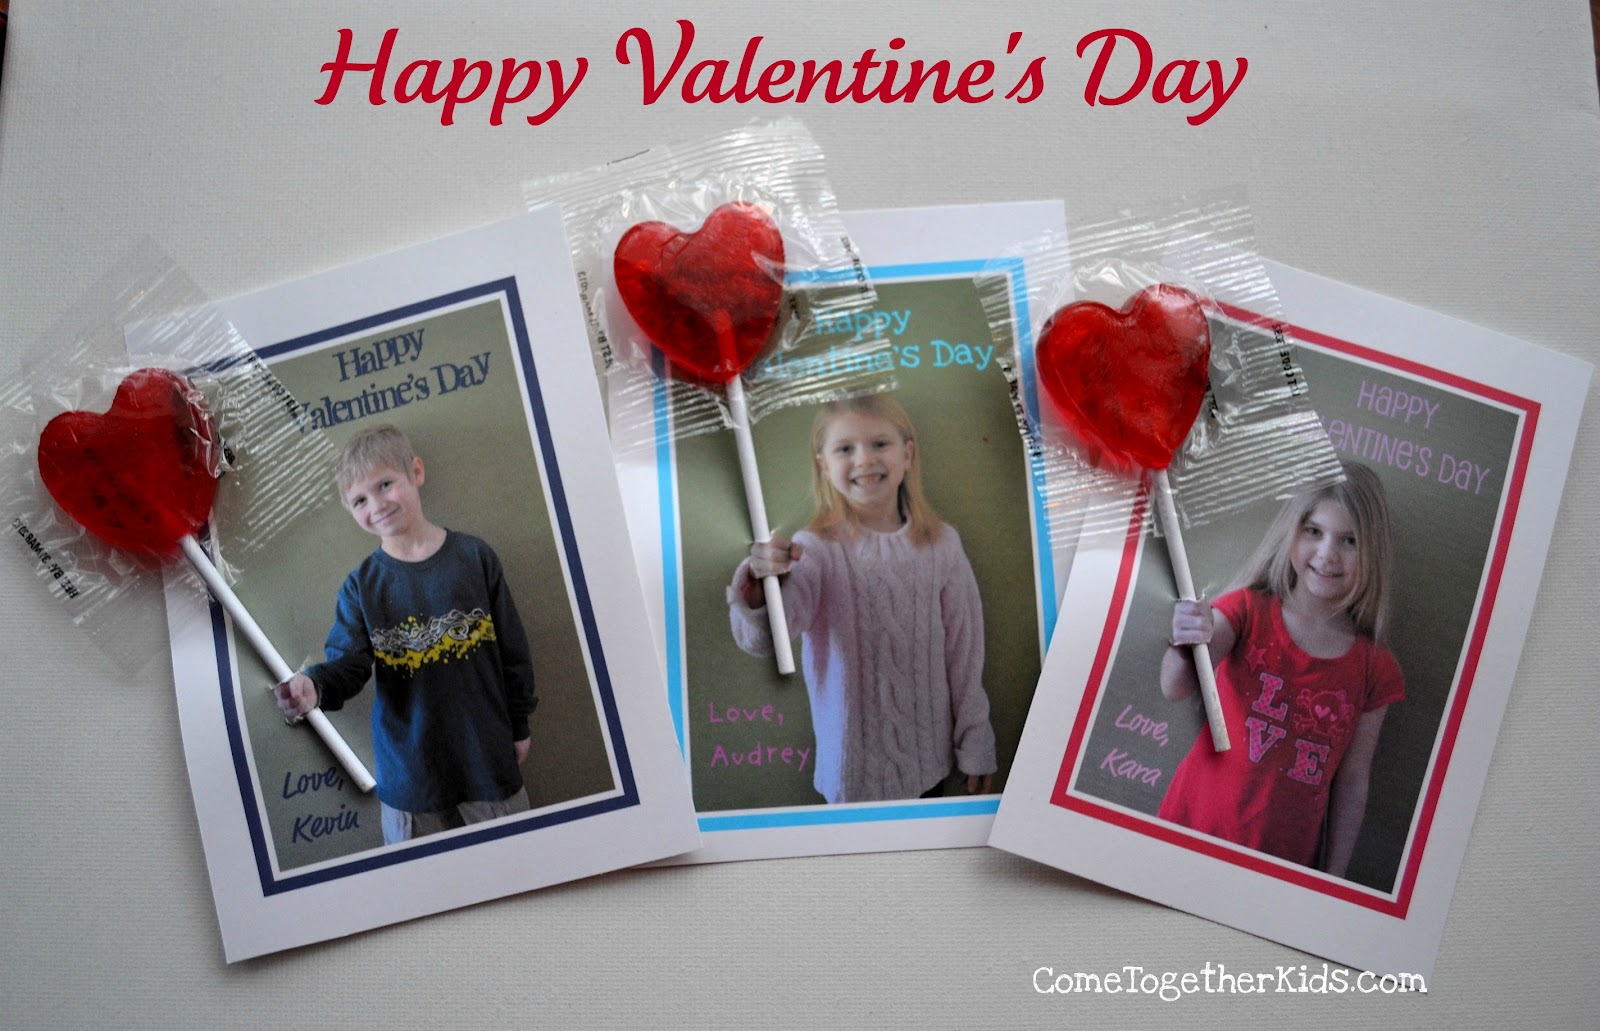 ... we are, wishing you a Happy Valentine's Day from Come Together Kids